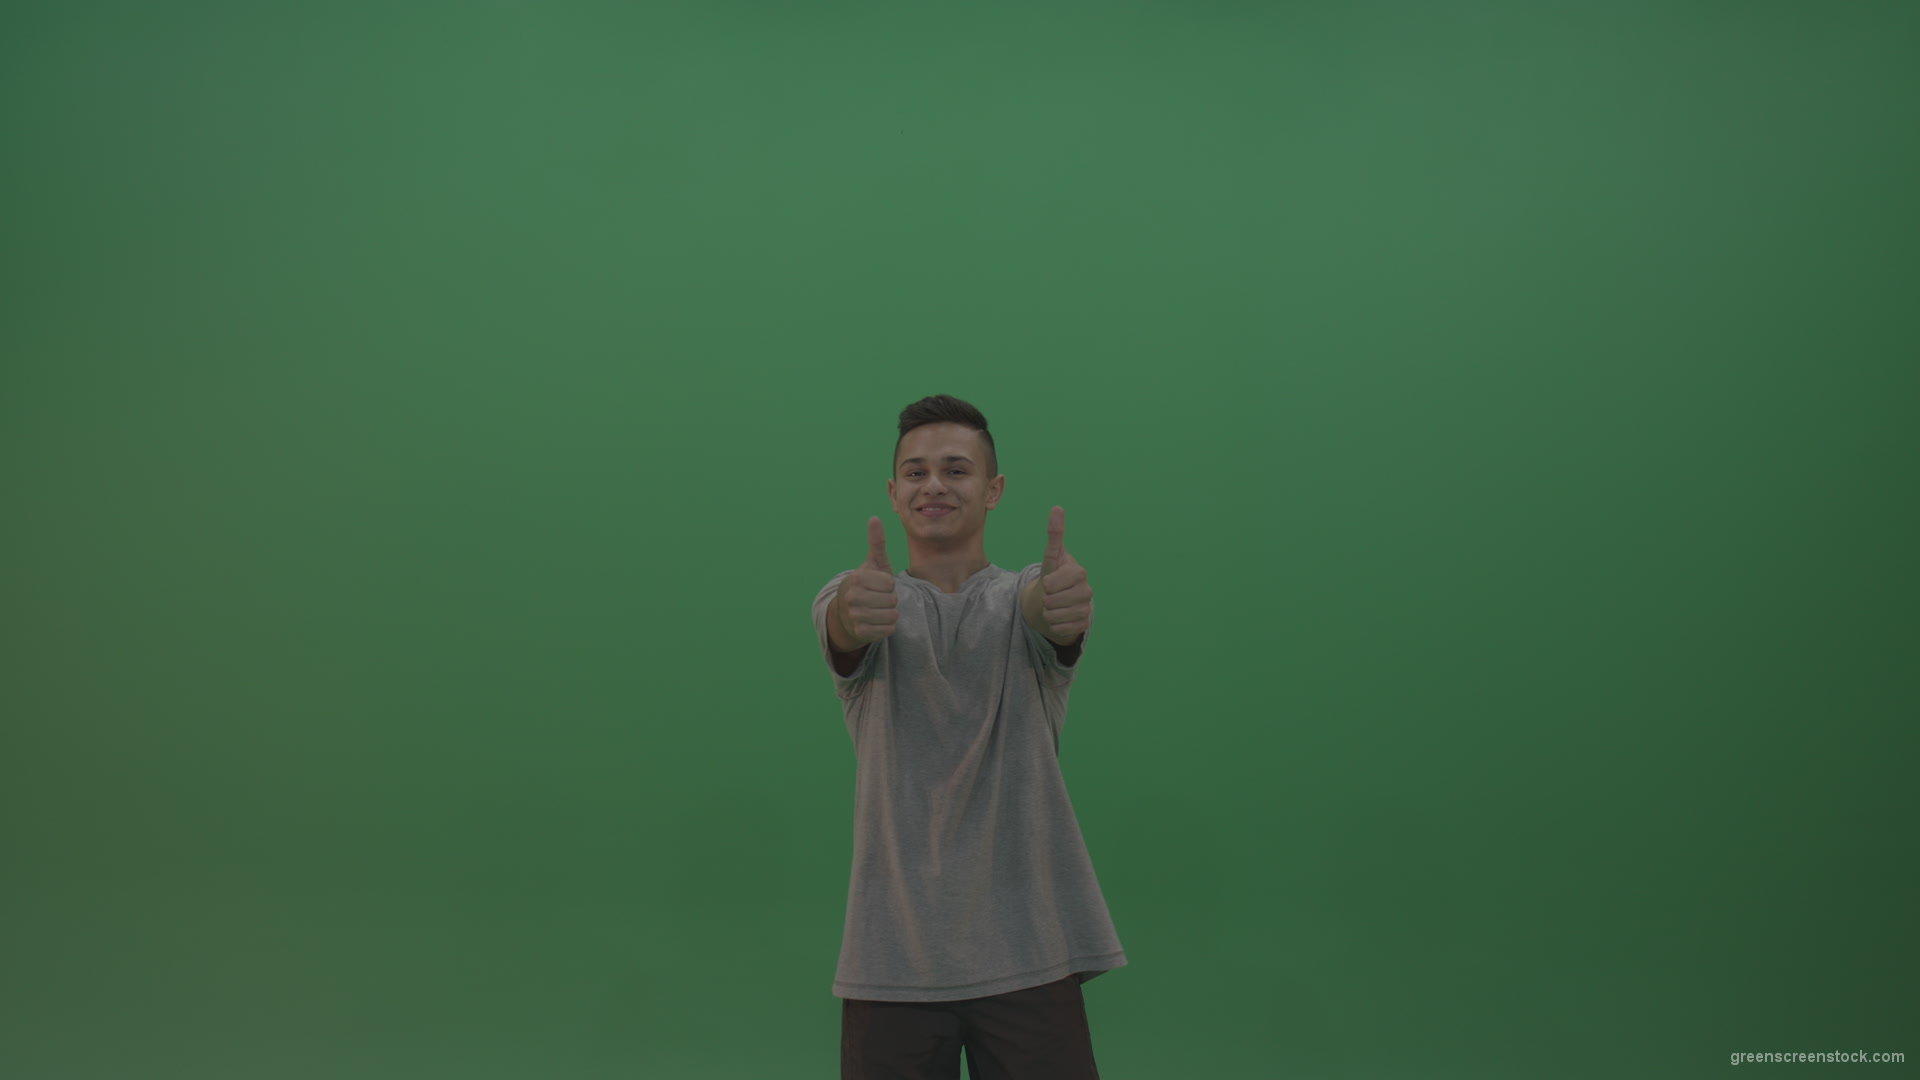 Boy-in-grey-wear-expresses-approval-by-giving-thumbs-up-over-green-screen-background_009 Green Screen Stock